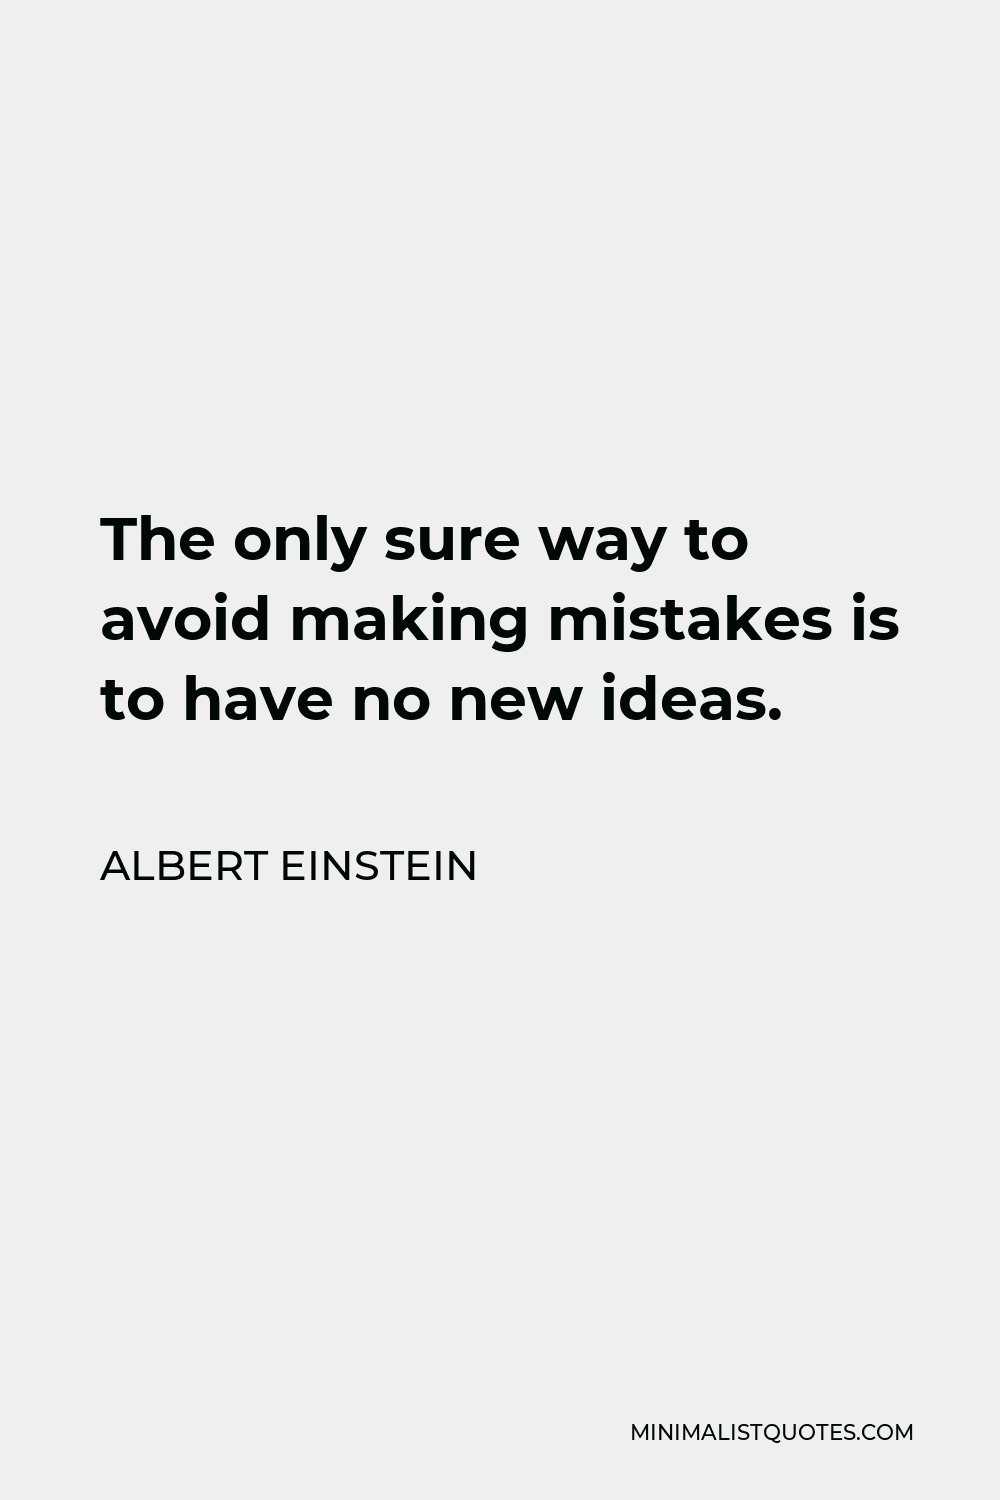 Albert Einstein Quote - The only sure way to avoid making mistakes is to have no new ideas.